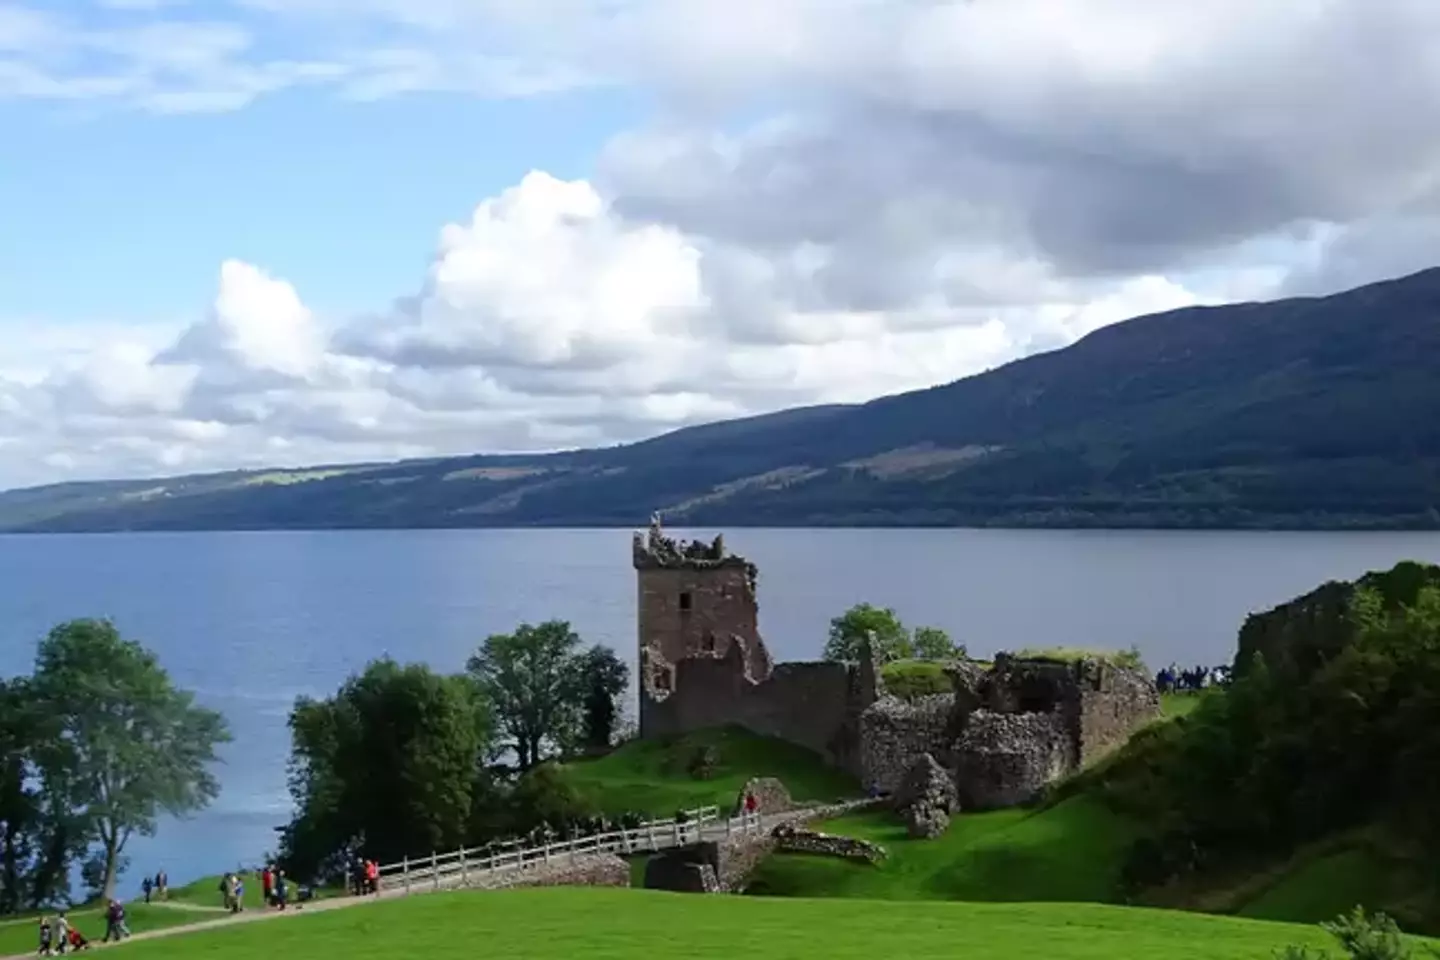 Even if you don't get to see the monster, Loch Ness is still a lovely place to visit.